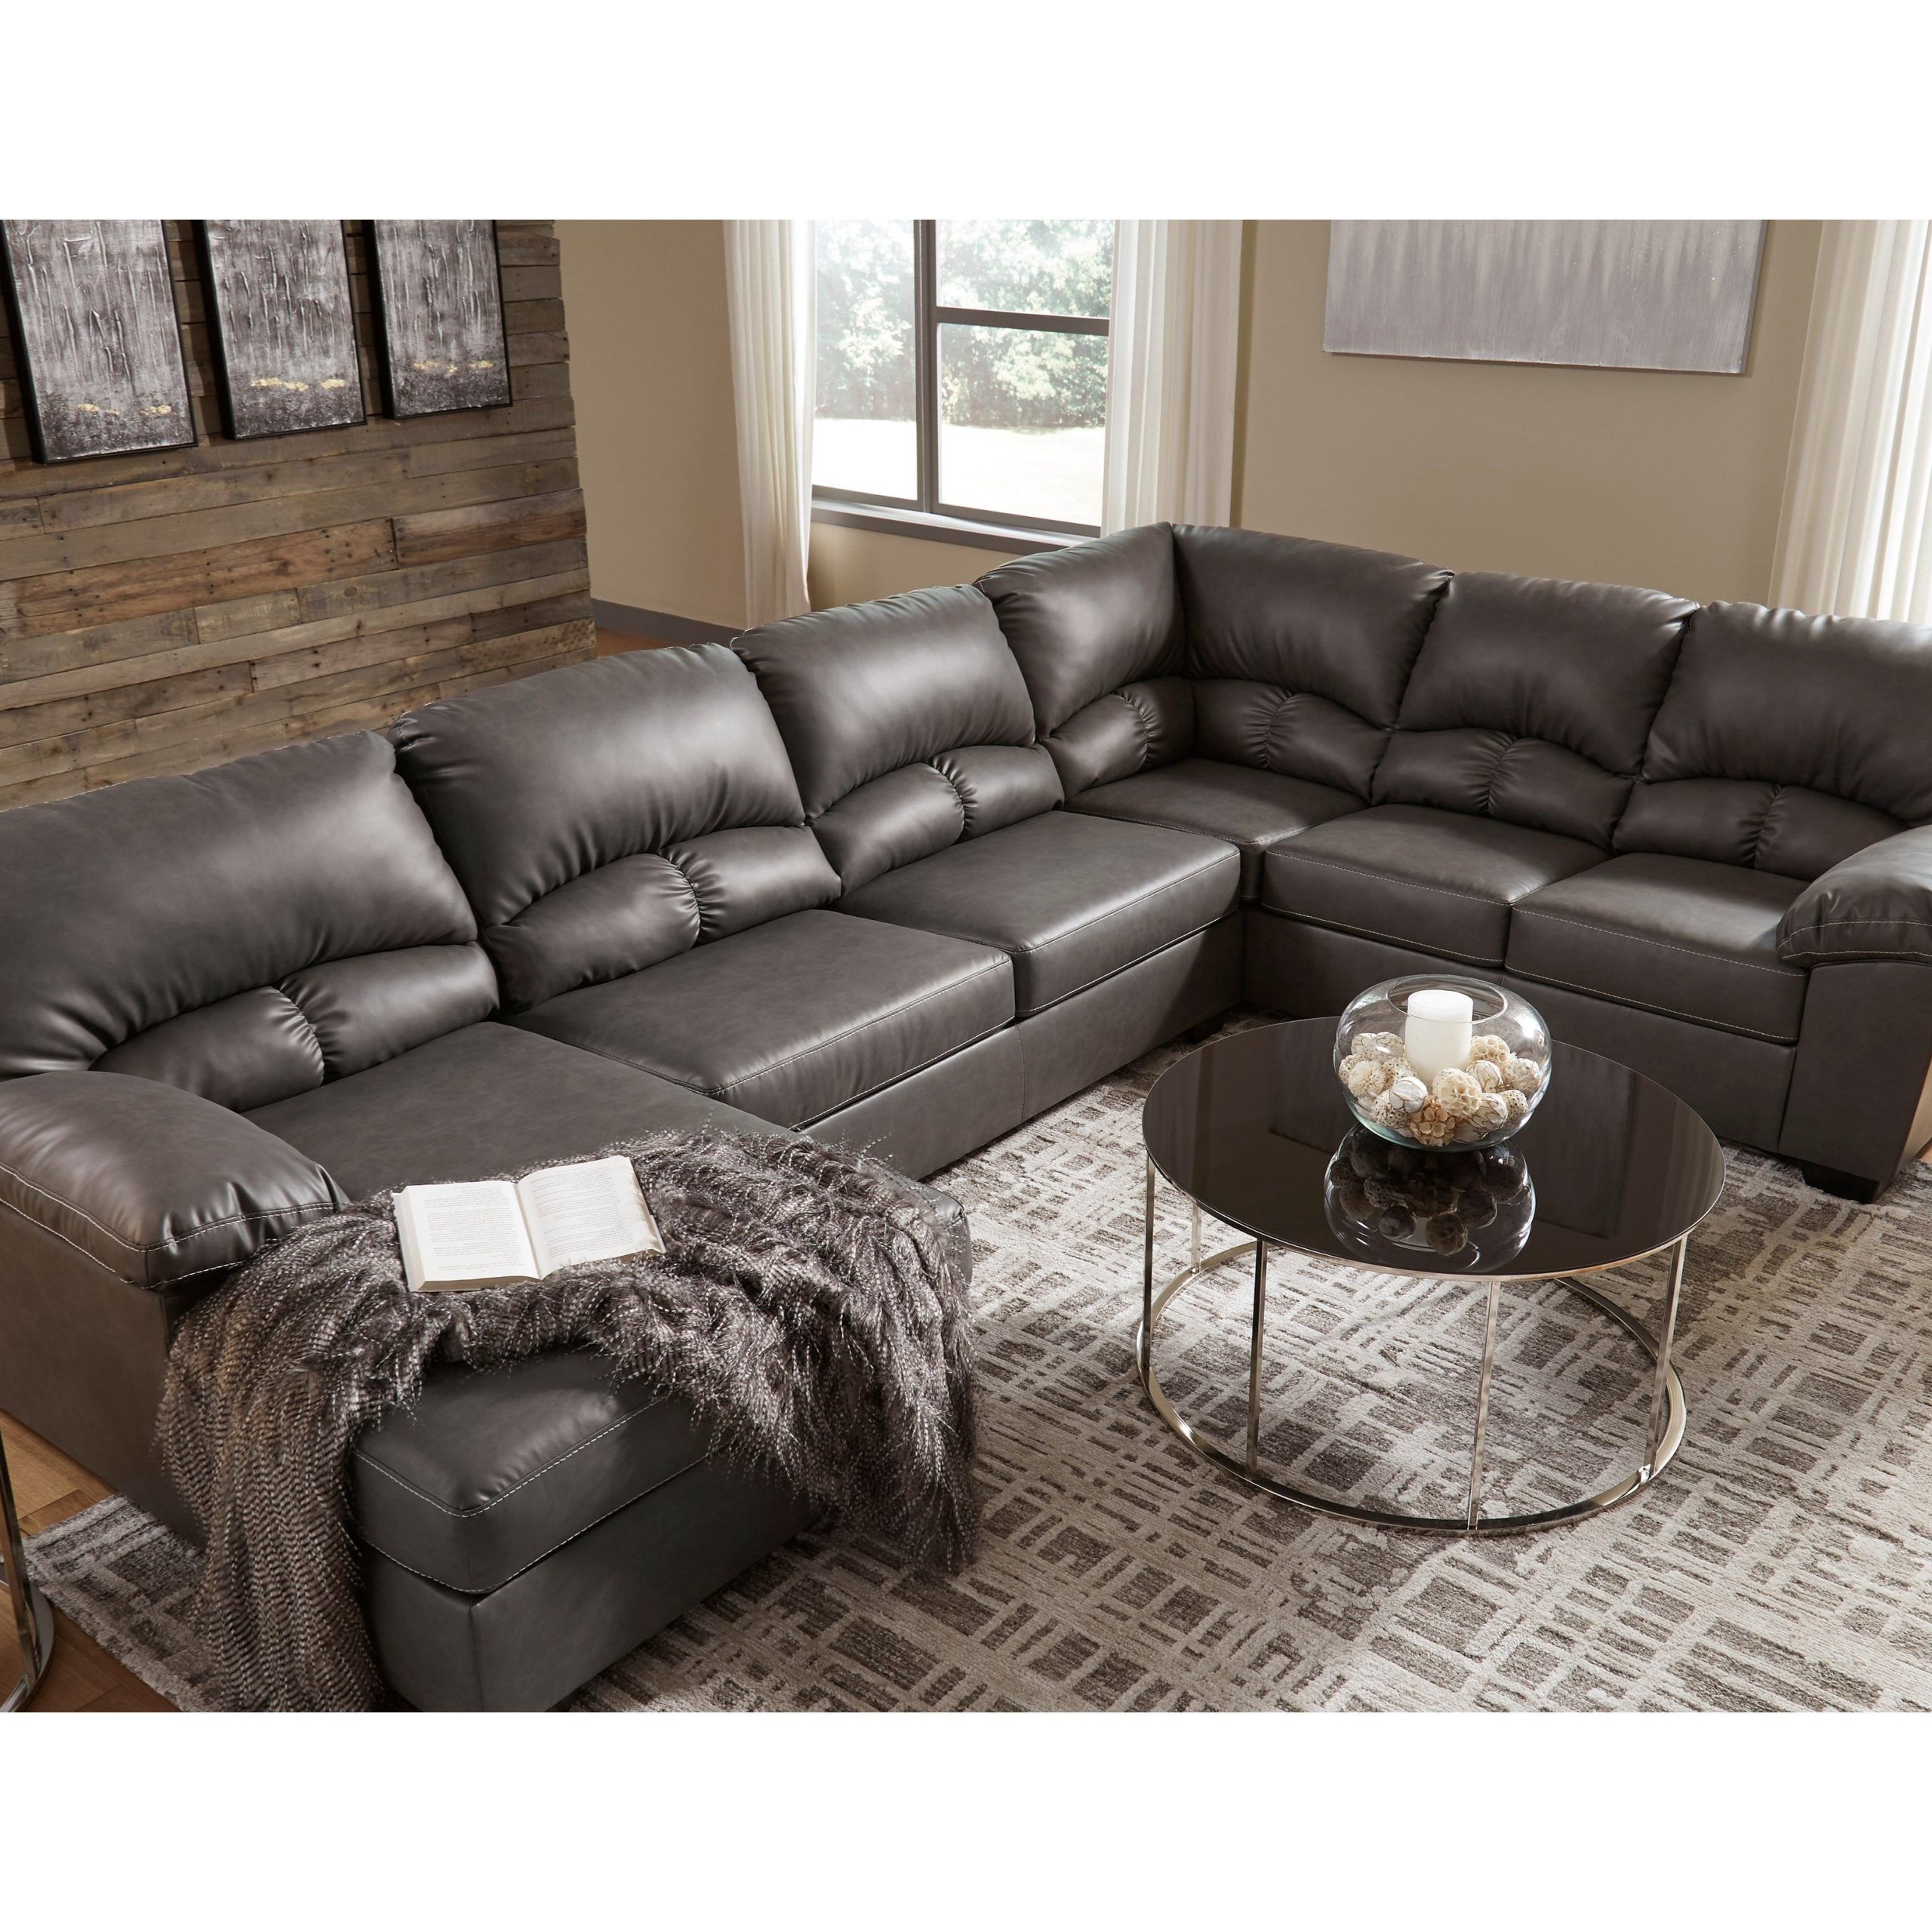 Benchcraftashley Aberton Faux Leather 3 Piece Sectional With Chaise Intended For Most Popular 3 Piece Leather Sectional Sofa Sets (View 2 of 15)